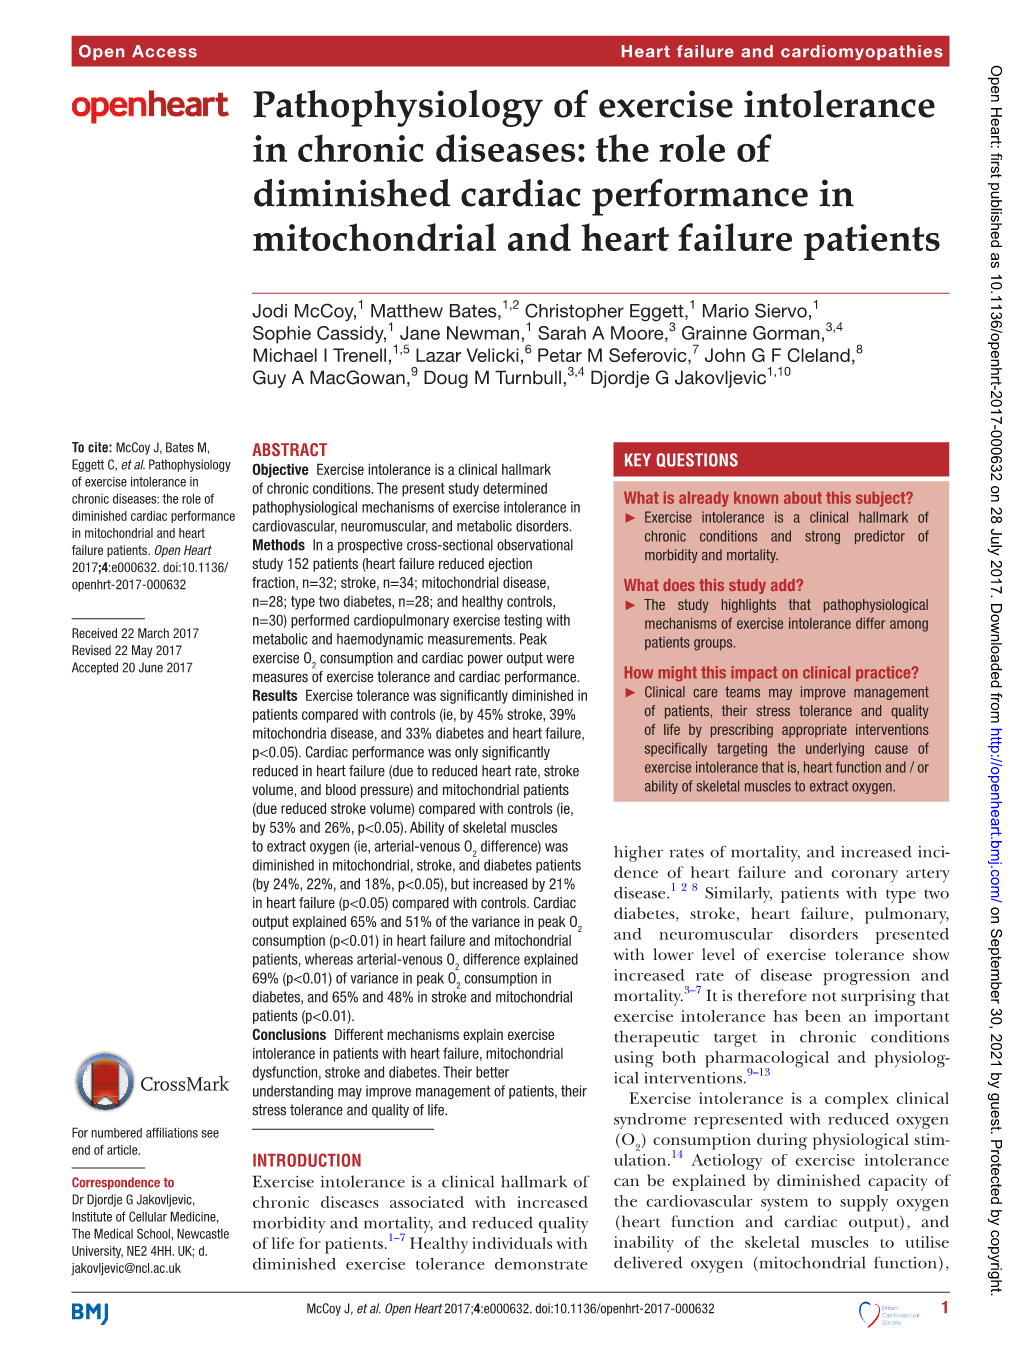 Pathophysiology of Exercise Intolerance in Chronic Diseases: the Role of Diminished Cardiac Performance in Mitochondrial and Heart Failure Patients